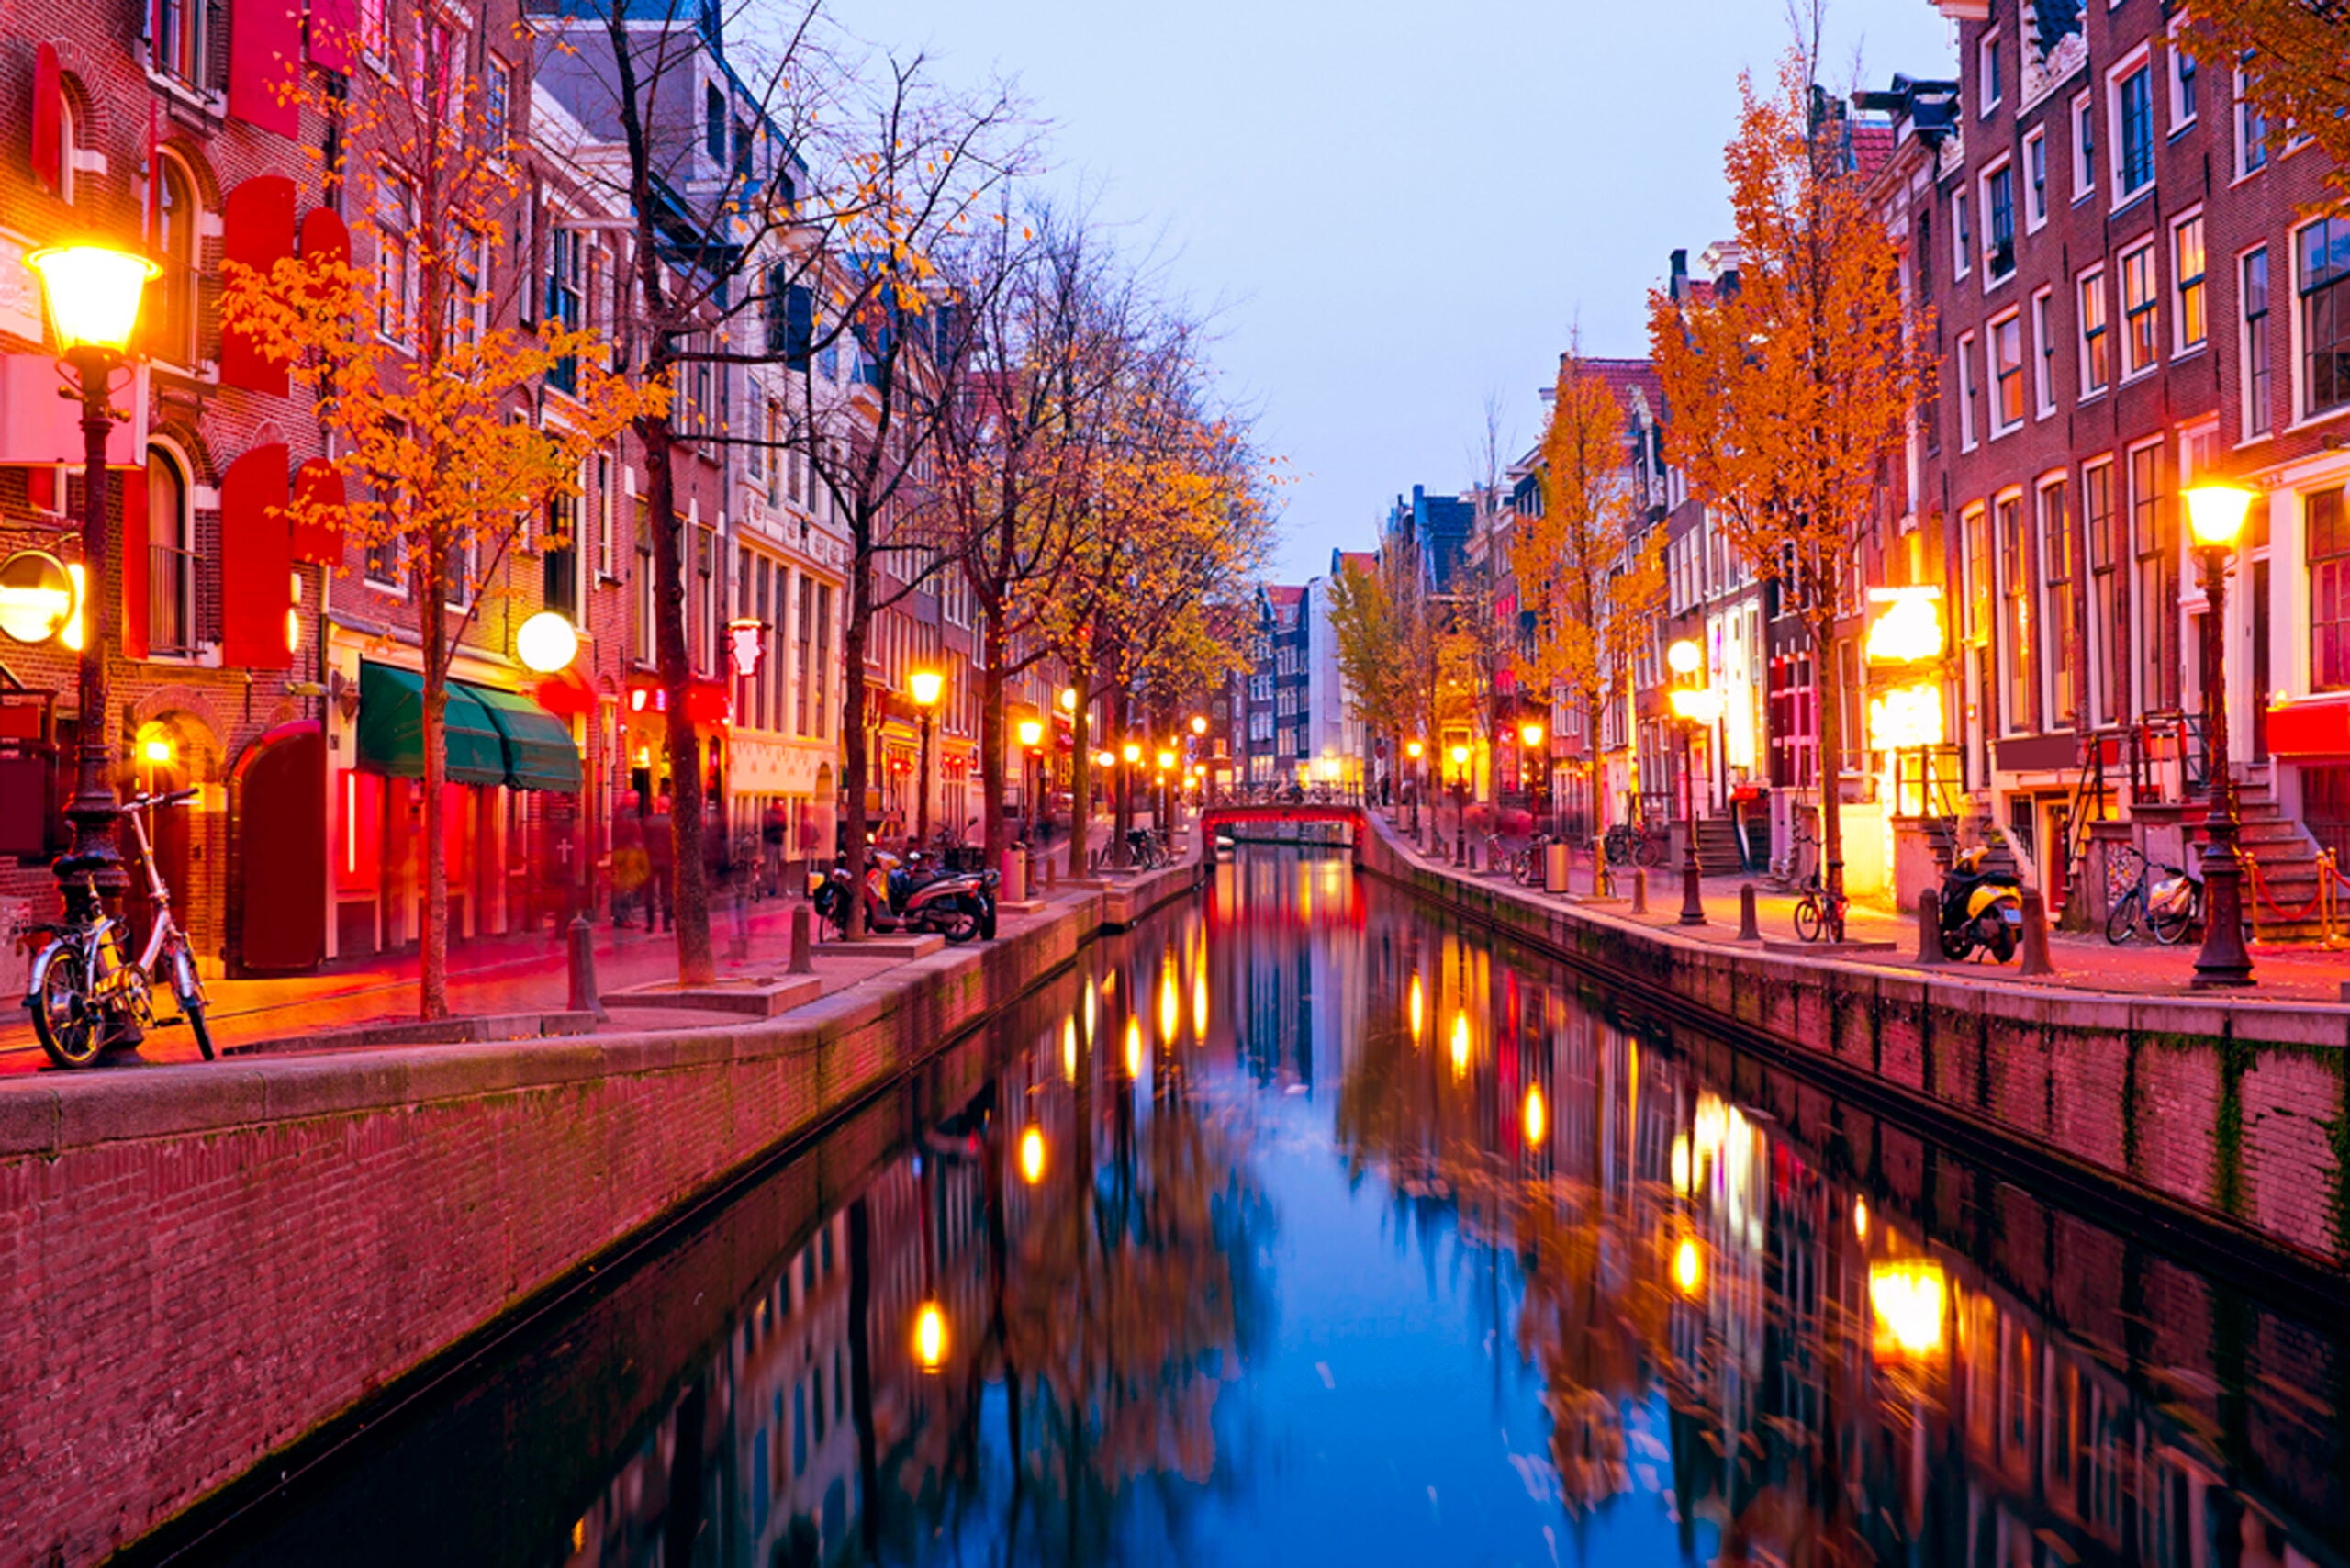 Red light district in Amsterdam the Netherlands at night Photo by Nisangha/Getty Images